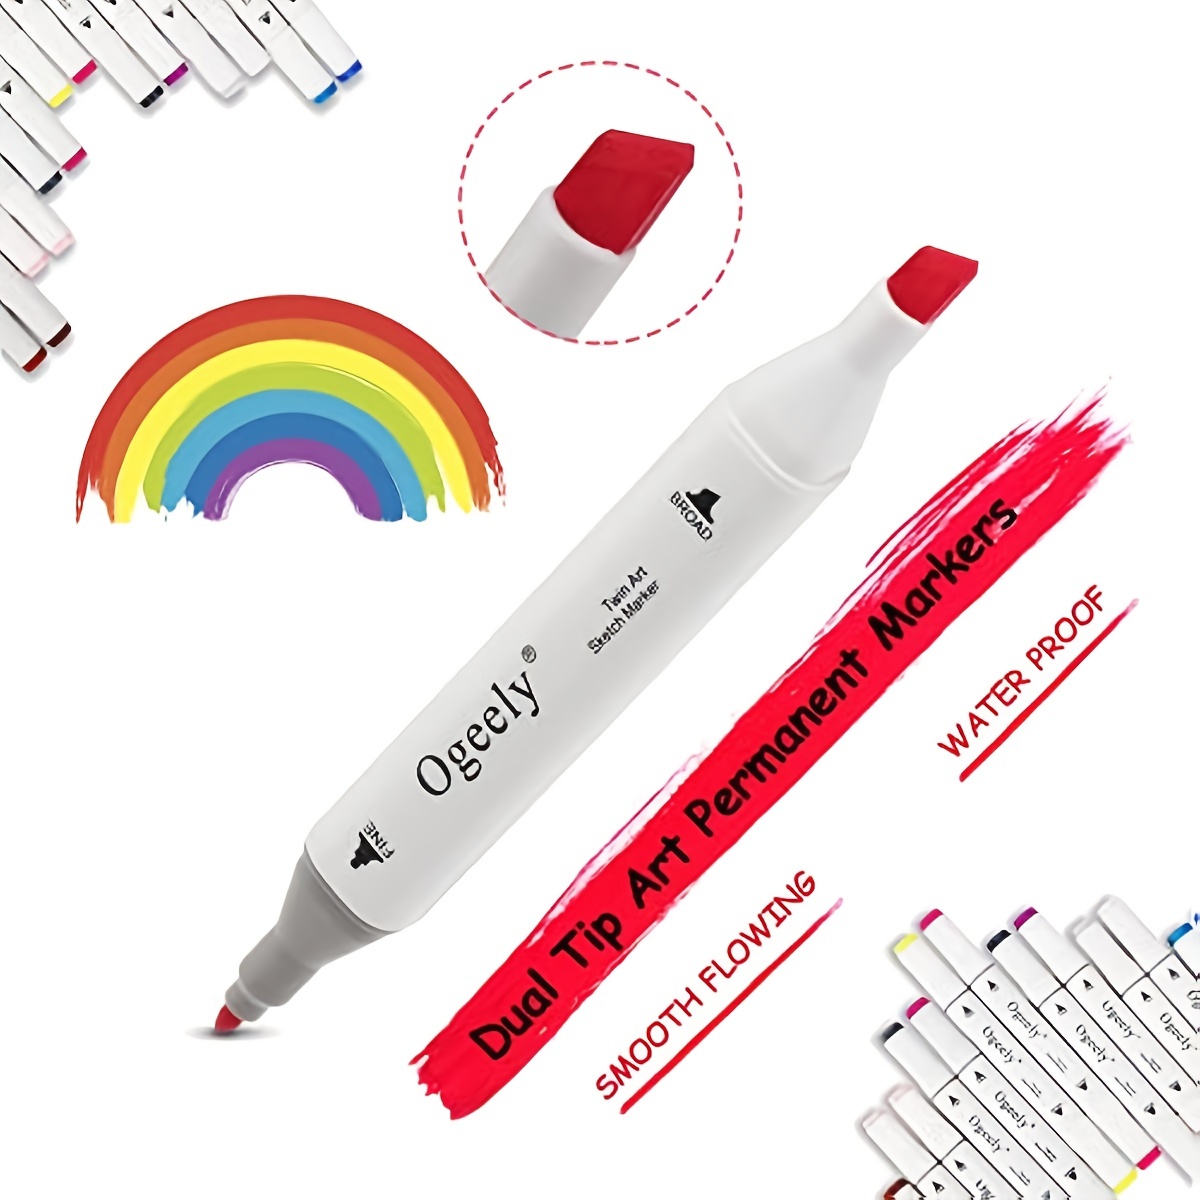 Artbeek 80 Art Markers, Dual Tip Permanent Markers for Kids, Highlighter  Pen Sketch Markers for Drawing, 40/60/80/120 Colors 